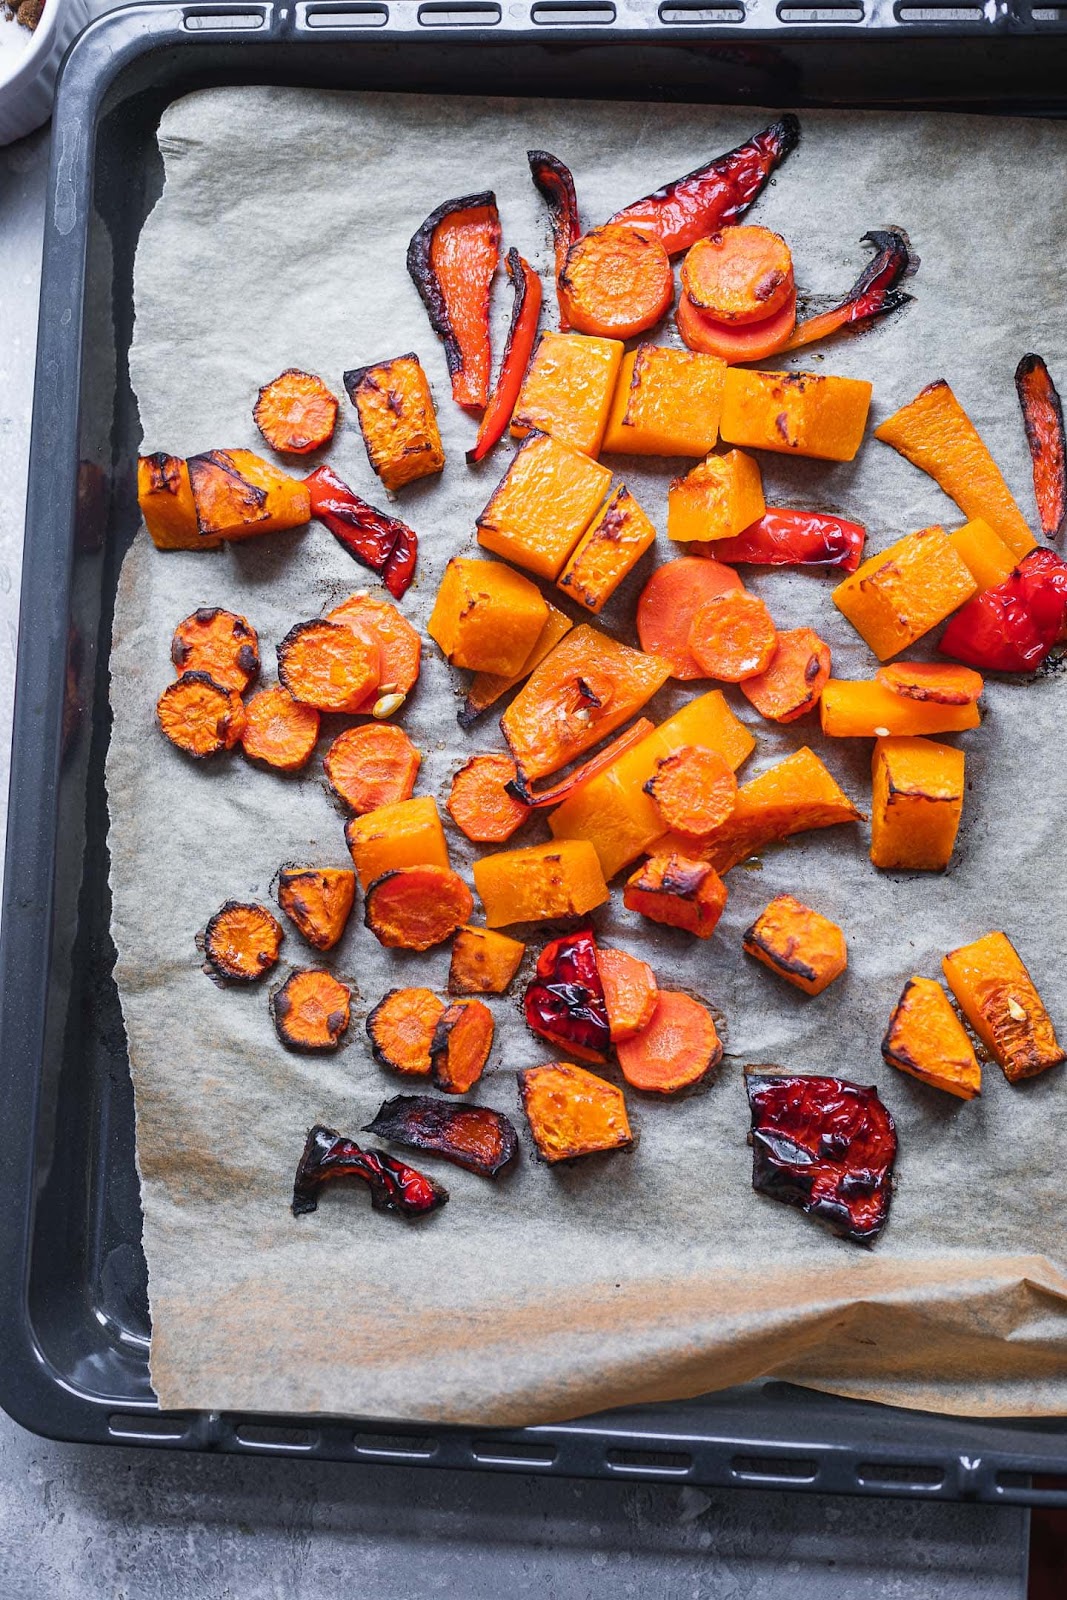 Roasted butternut squash, carrots and bell pepper on a baking tray